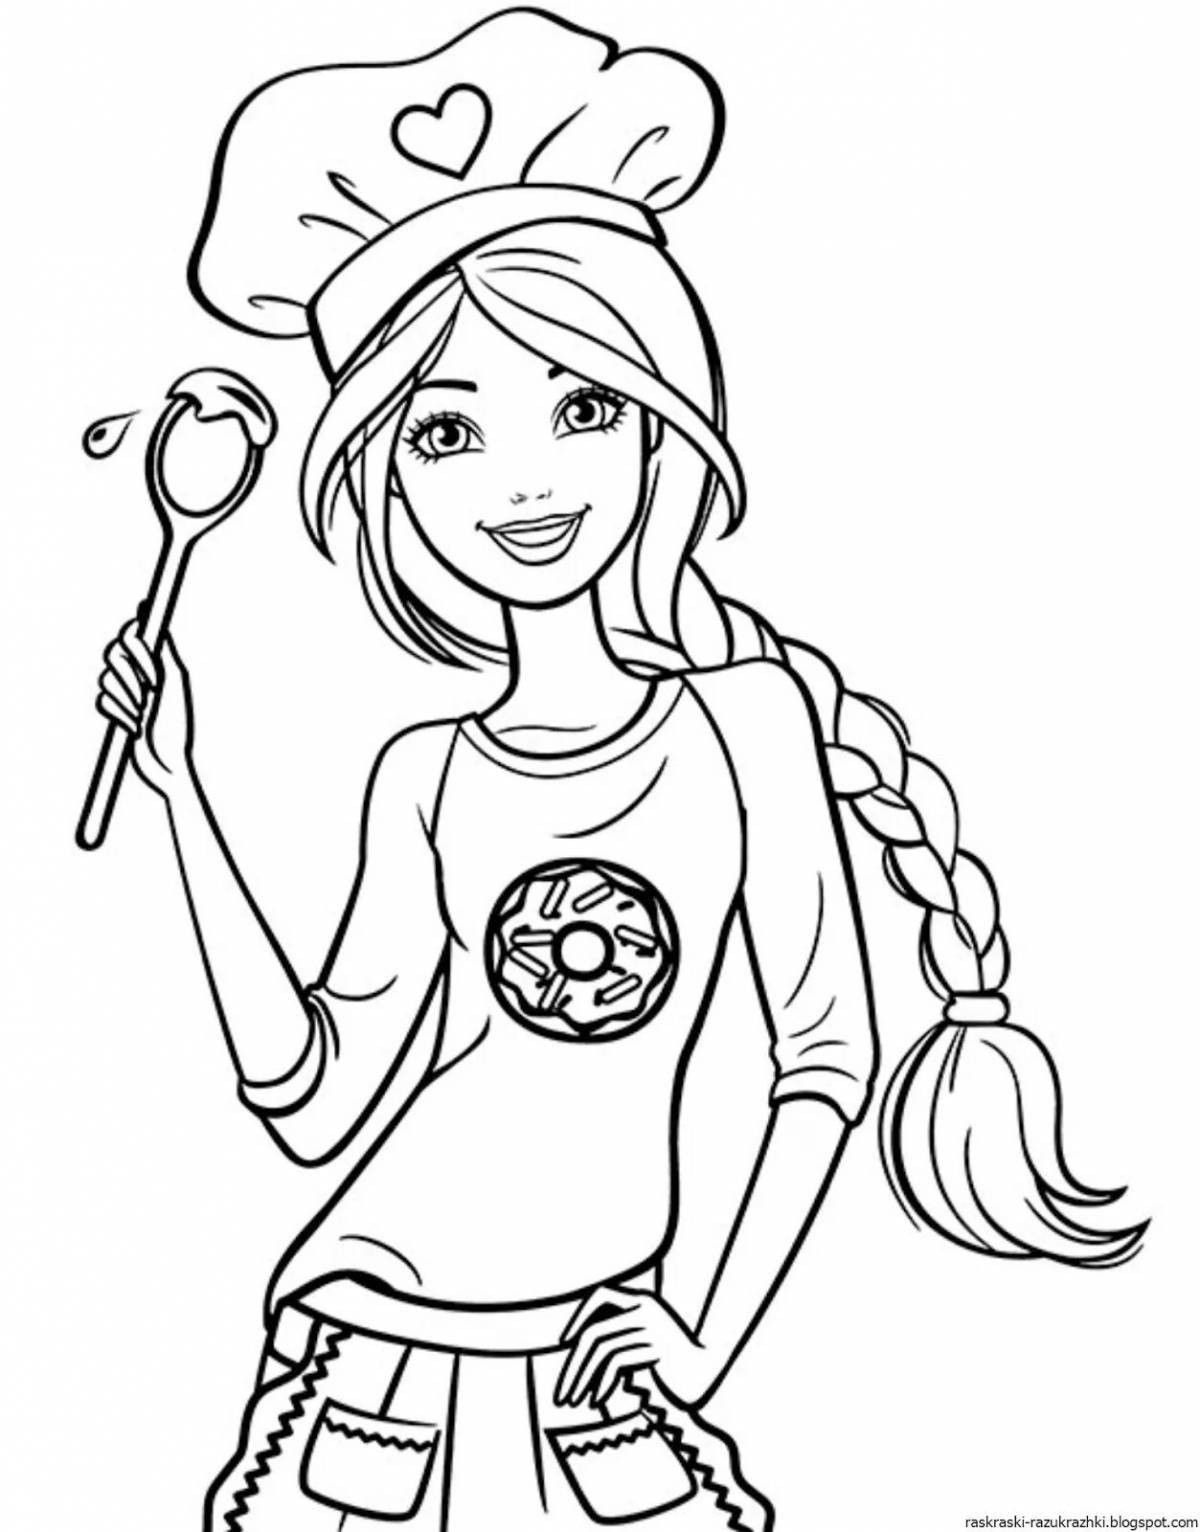 Coloring pages for girls 9